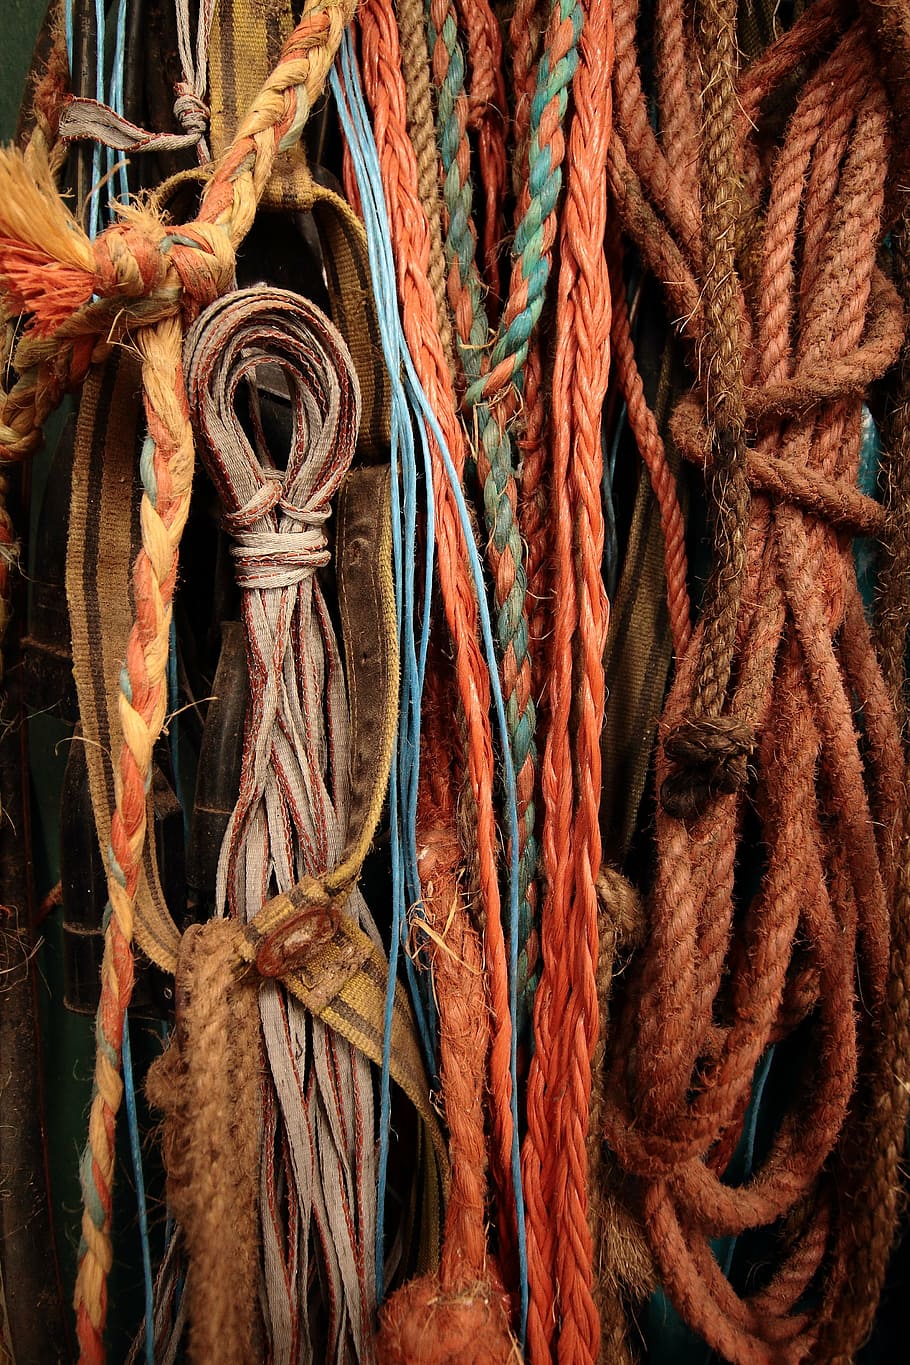 rope, knot, tros, color, loop, cord, tied Knot, strength, full frame, textured